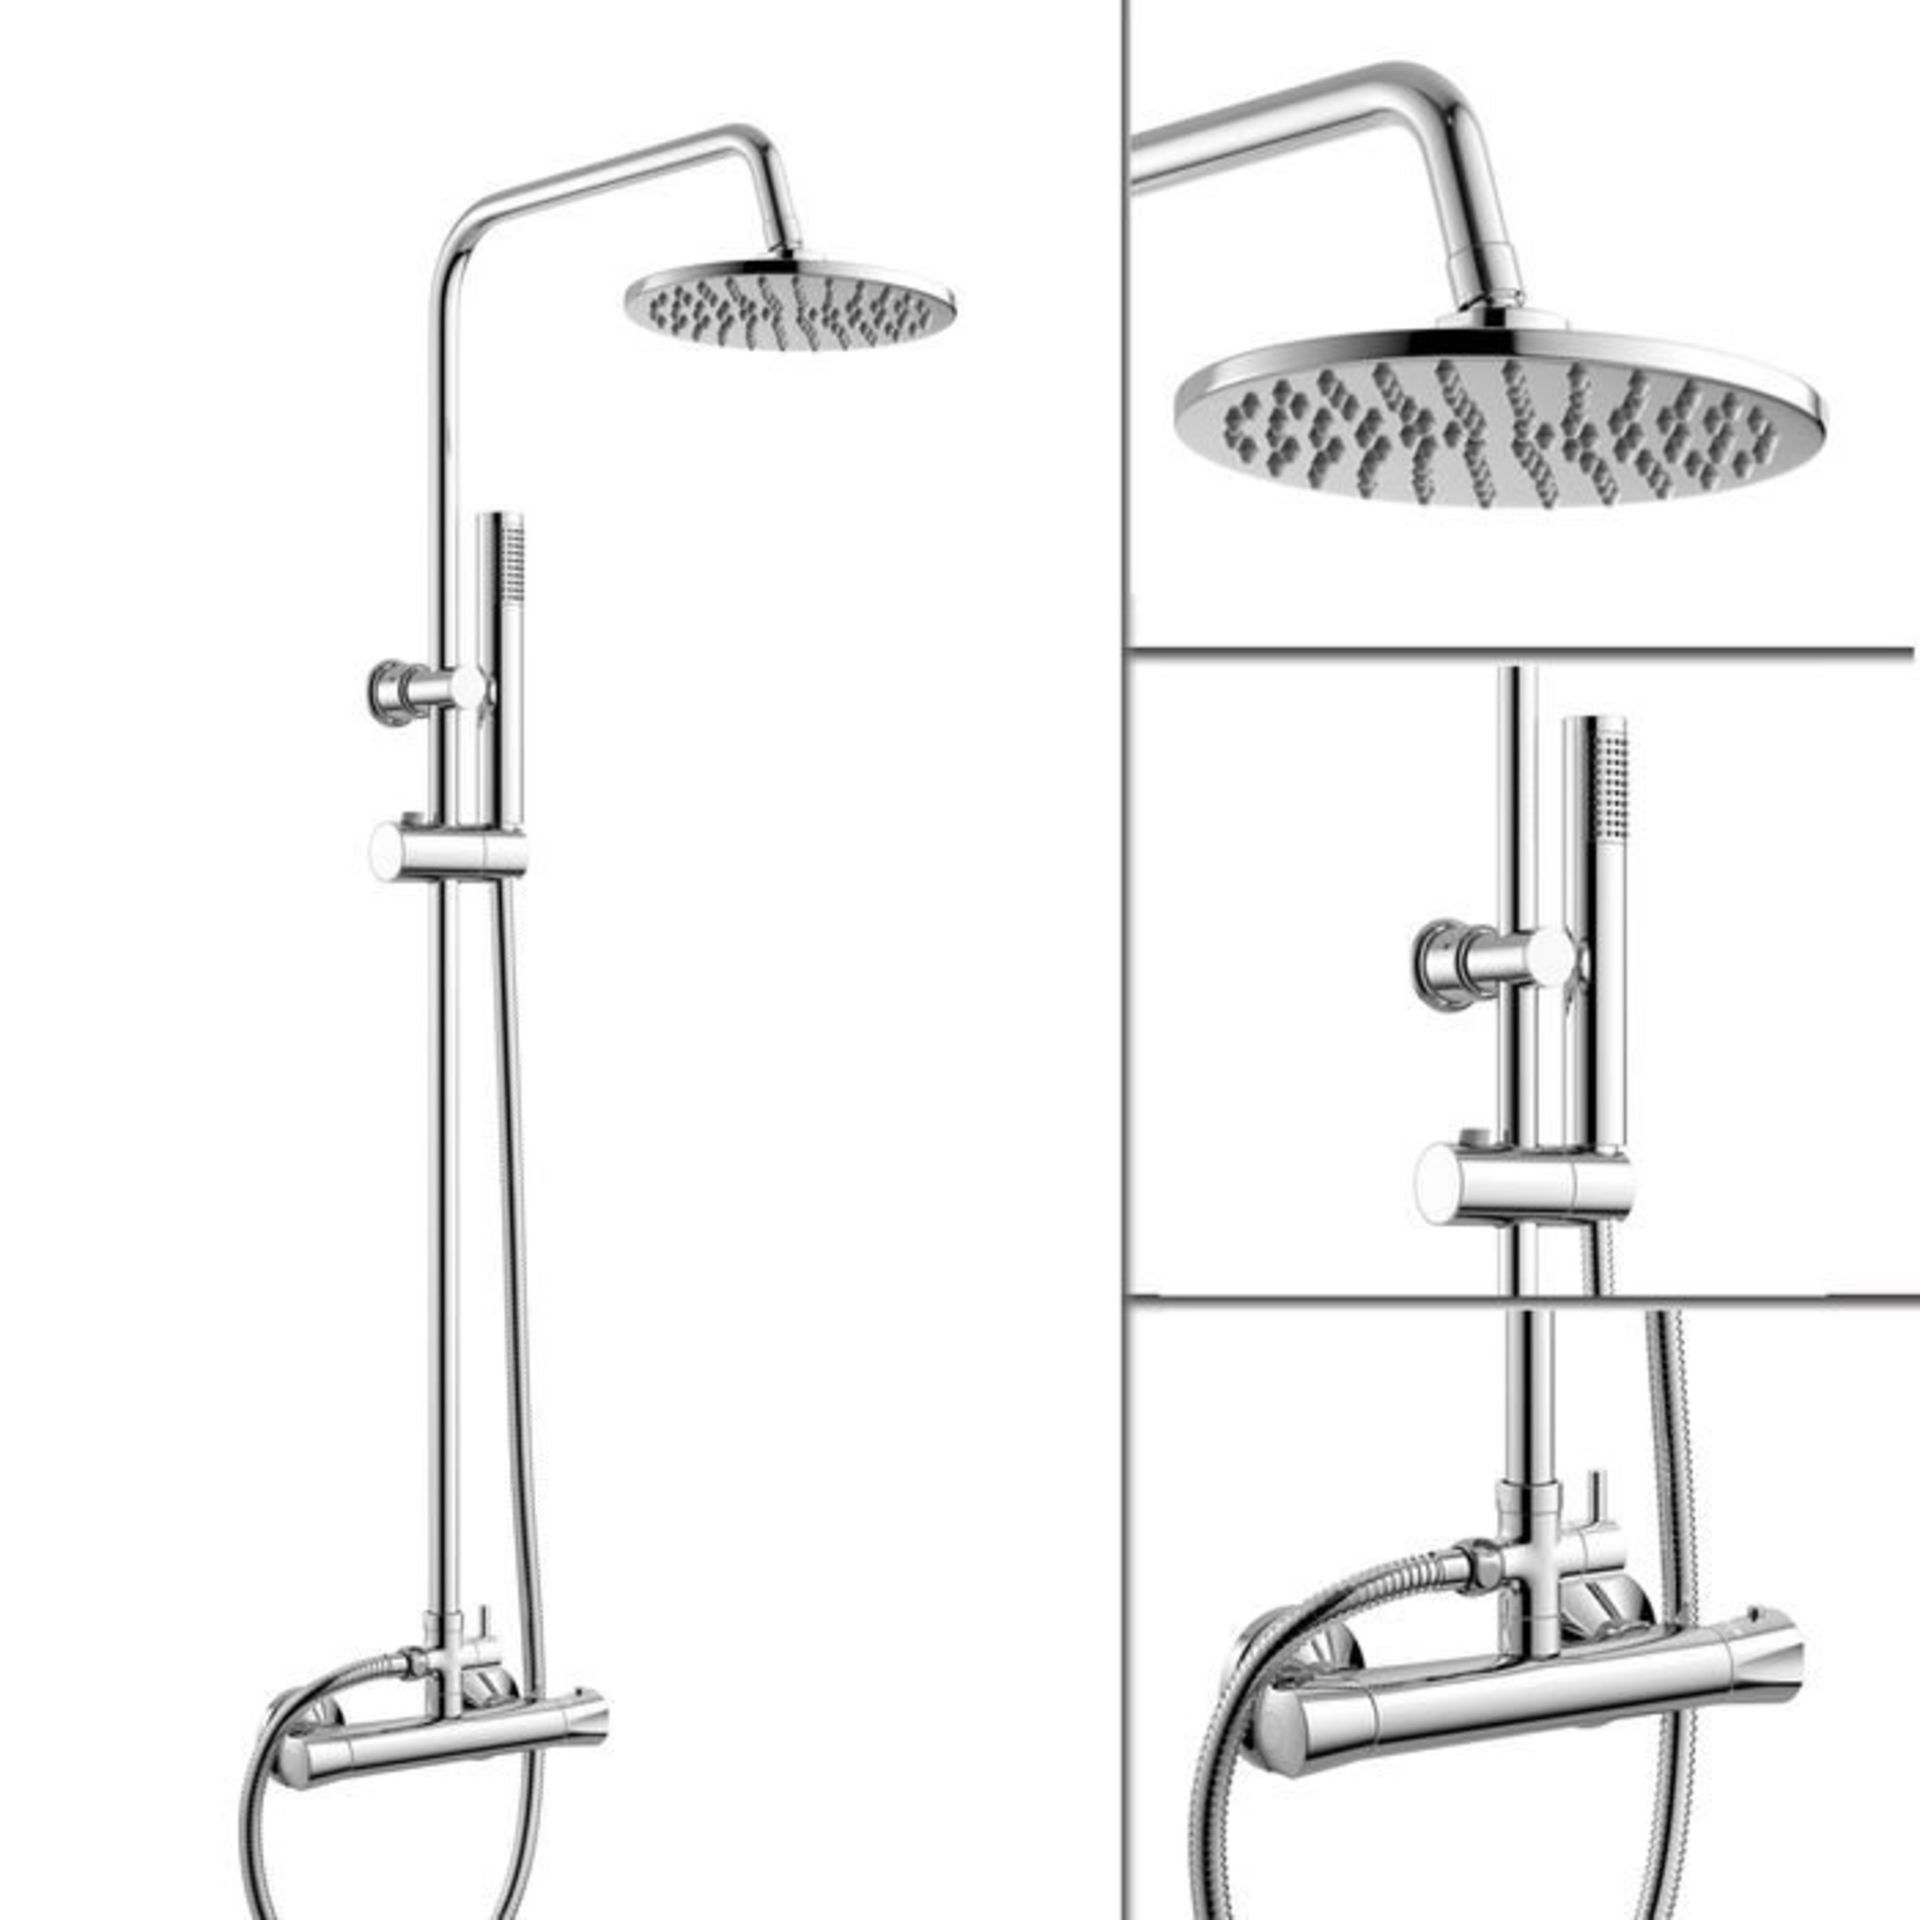 (Z71) Round Exposed Thermostatic Shower Kit Medium Head. They say three is a magic number, which - Image 2 of 5